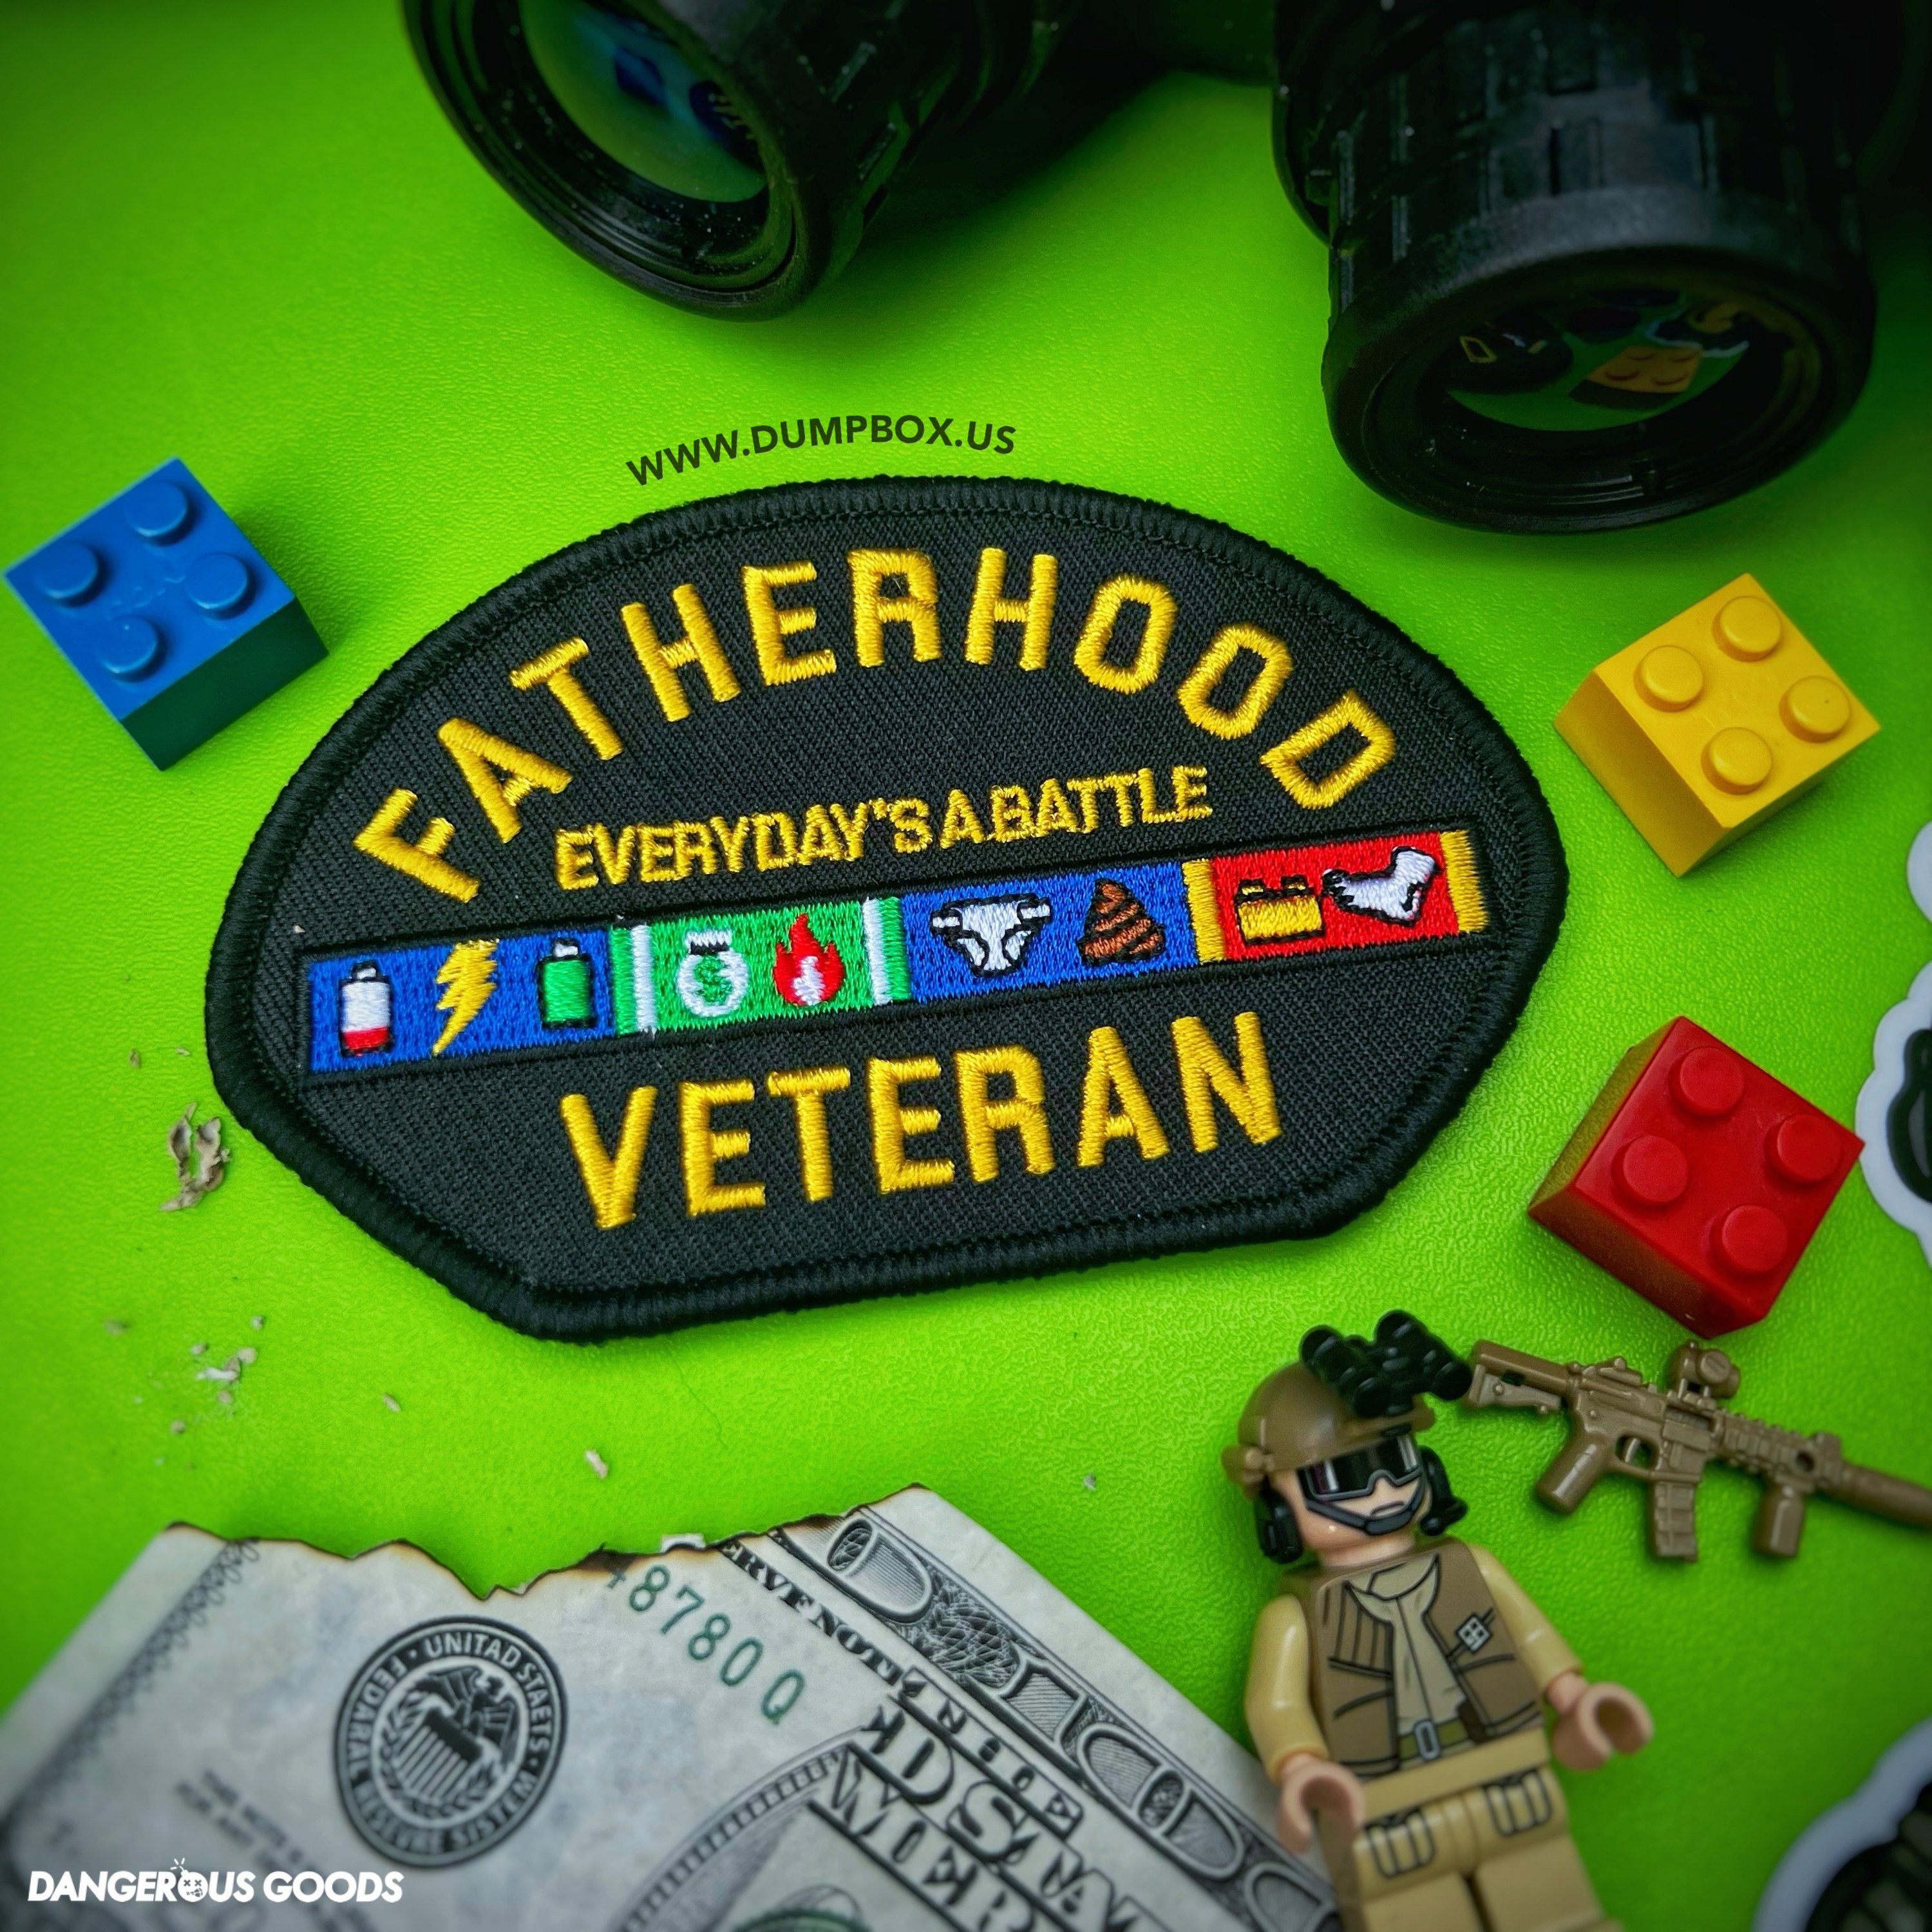 Black Embroidered Patch with yellow letters that read Fatherhood Veteran